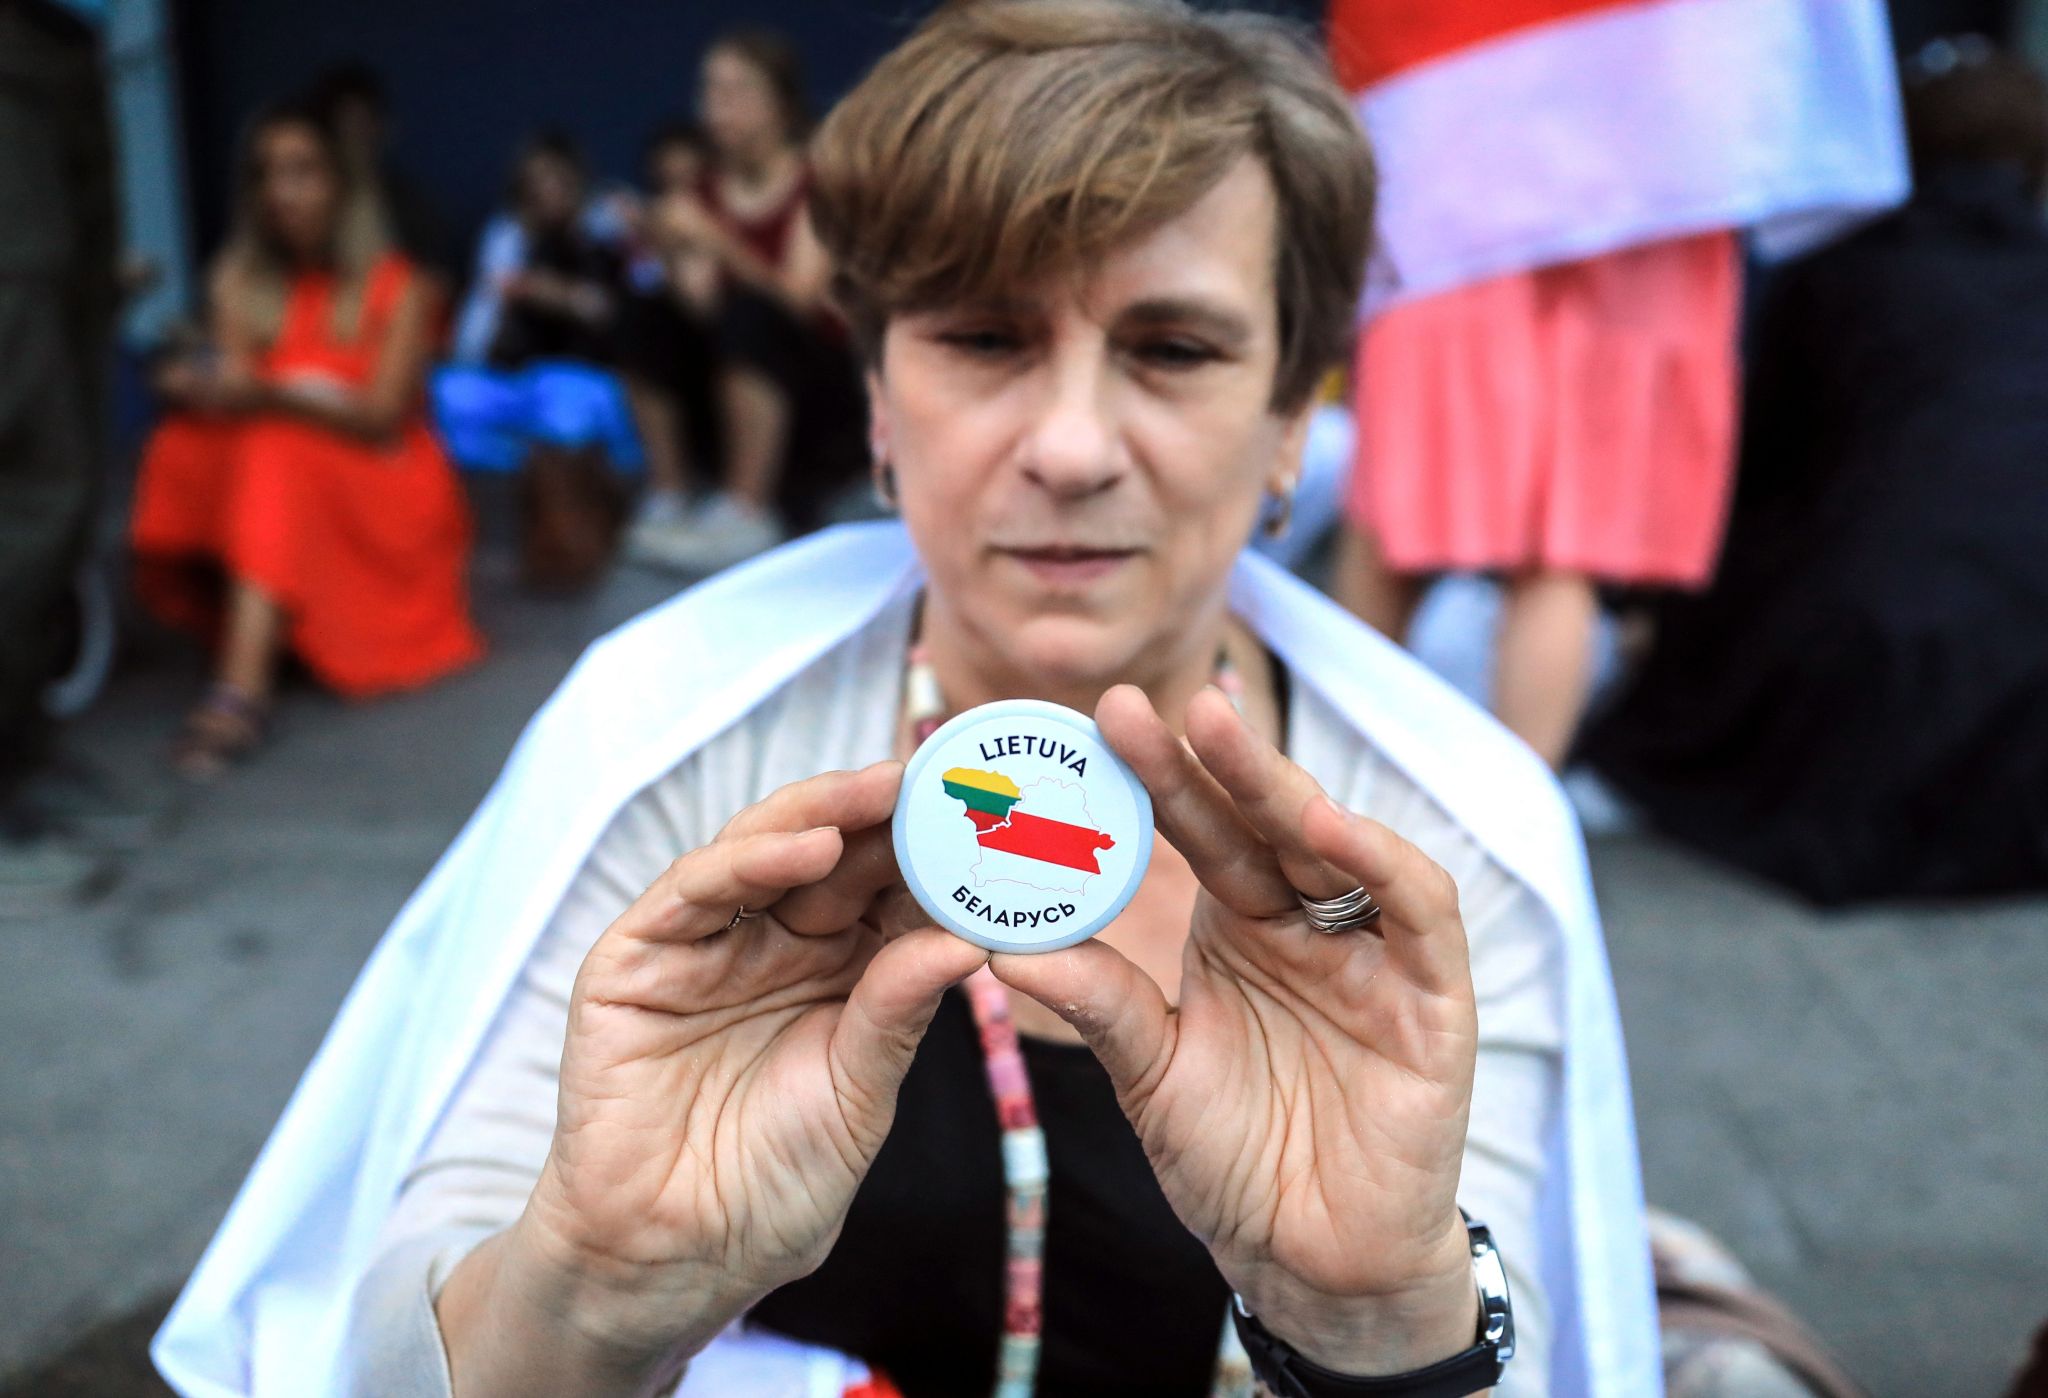 A woman stands with a button with Lithuania and Belarus country shapes on it during a protest